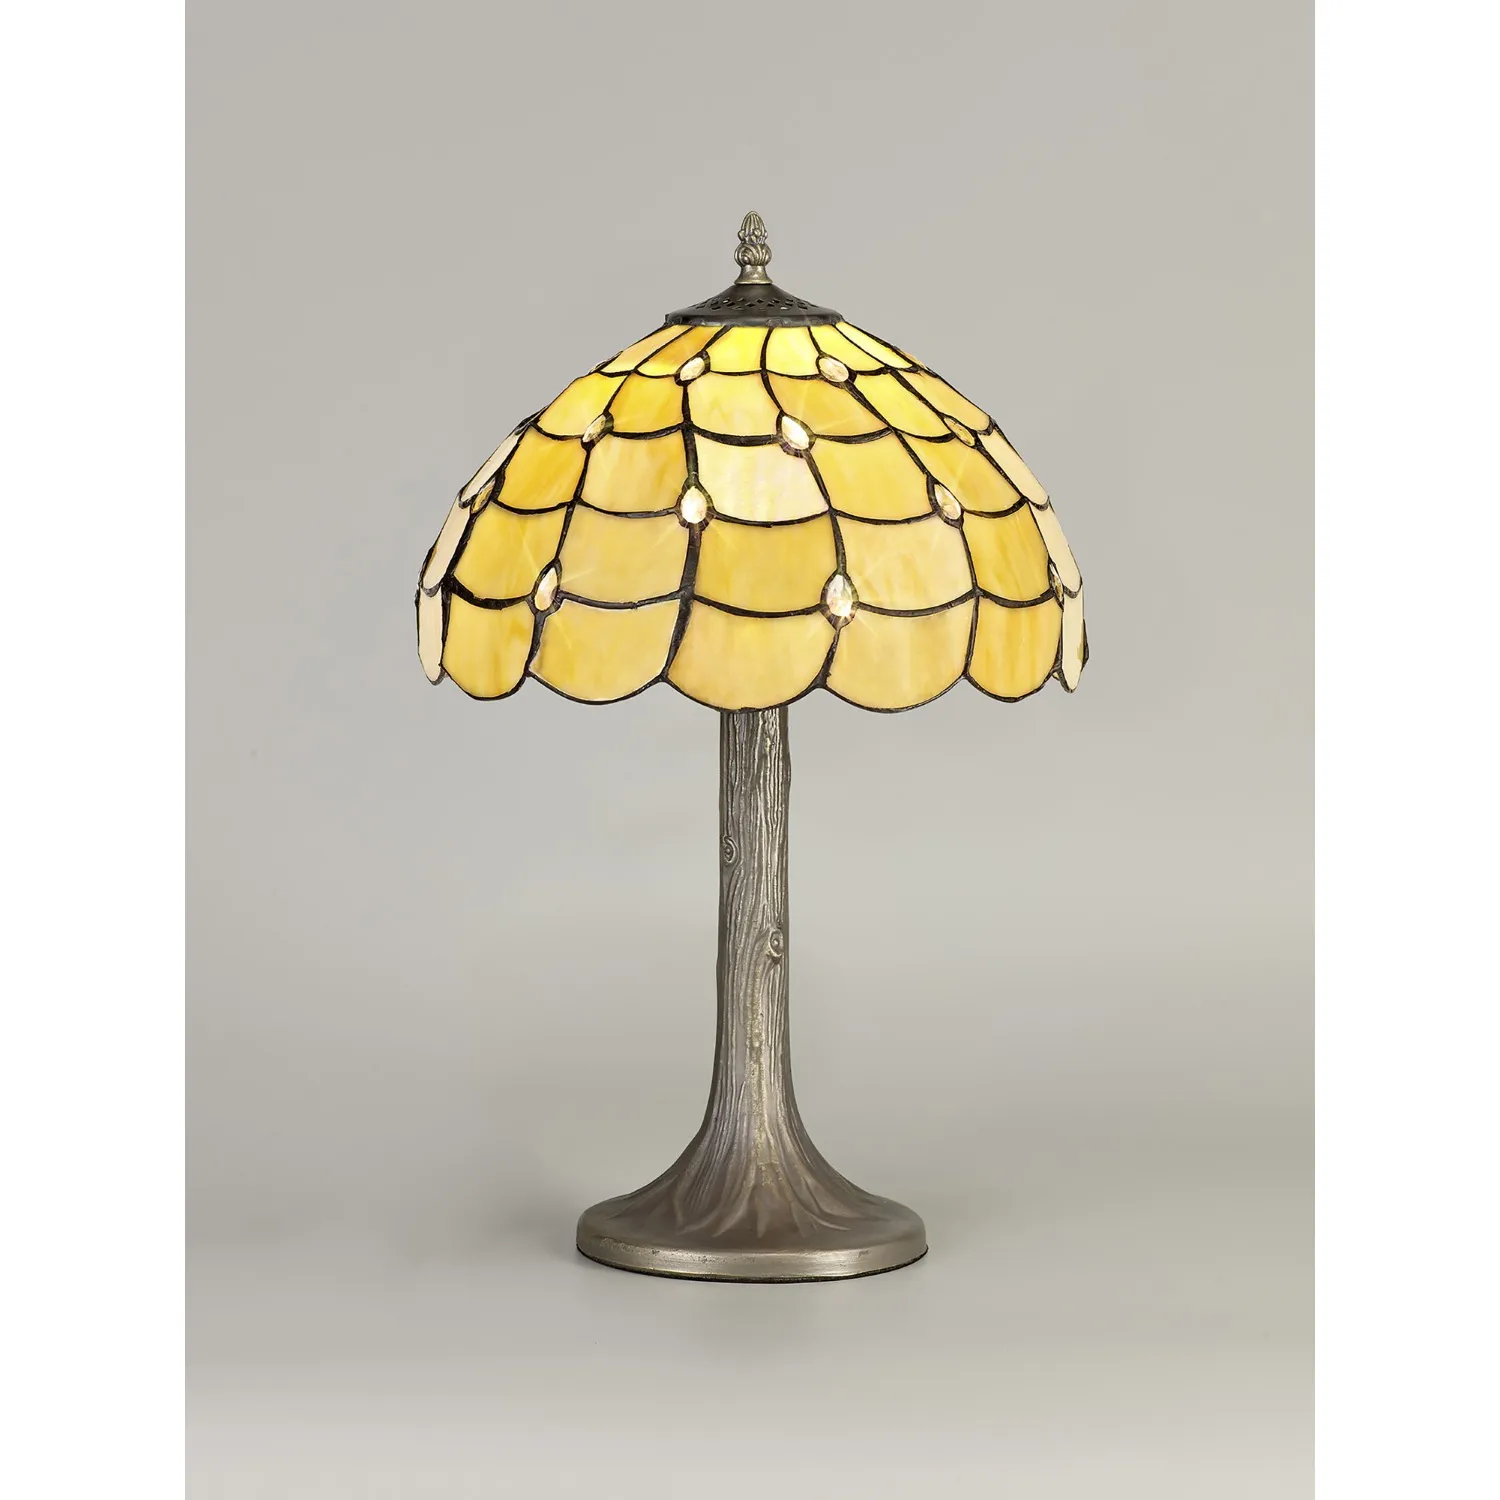 Stratford 1 Light Tree Like Table Lamp E27 With 30cm Tiffany Shade, Beige Clear Crystal Aged Antique Brass